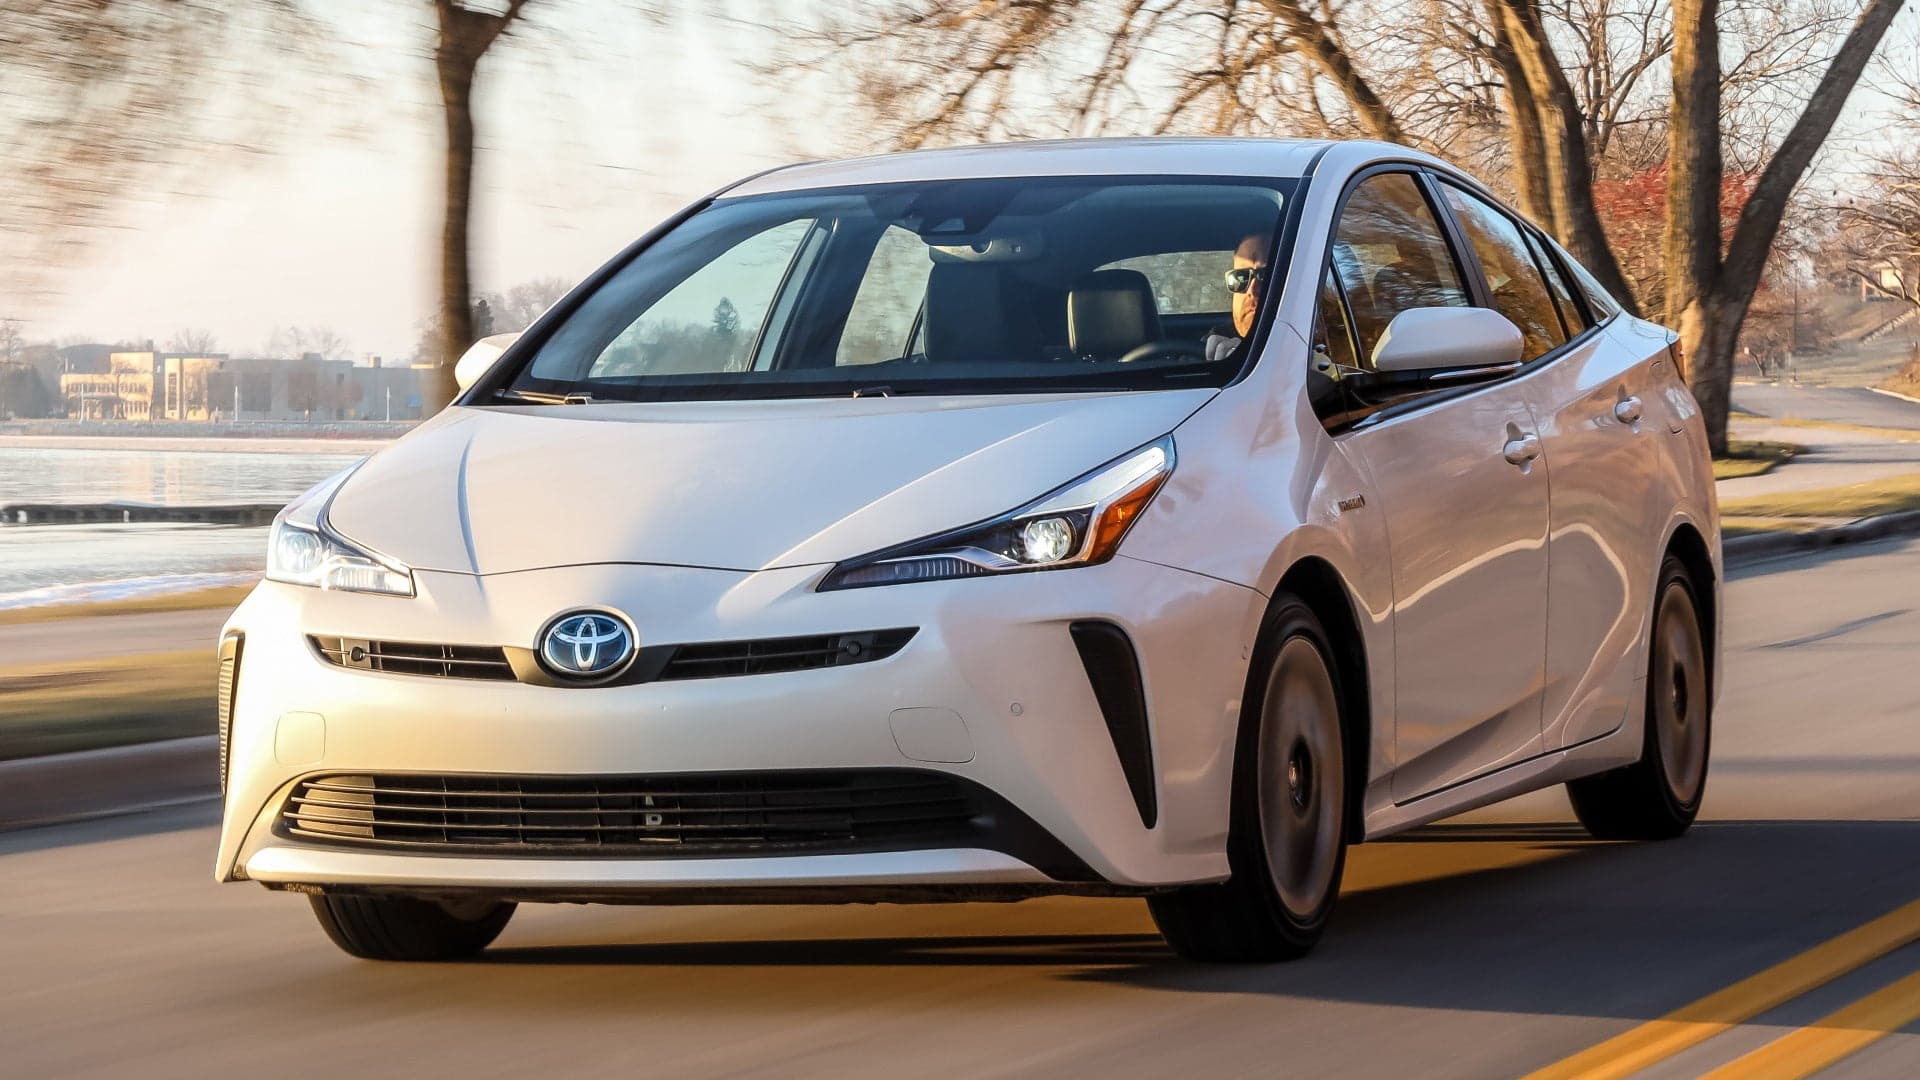 Toyotas Make Up Seven of the Top 10 Cars Owners Keep for 15+ Years: Study